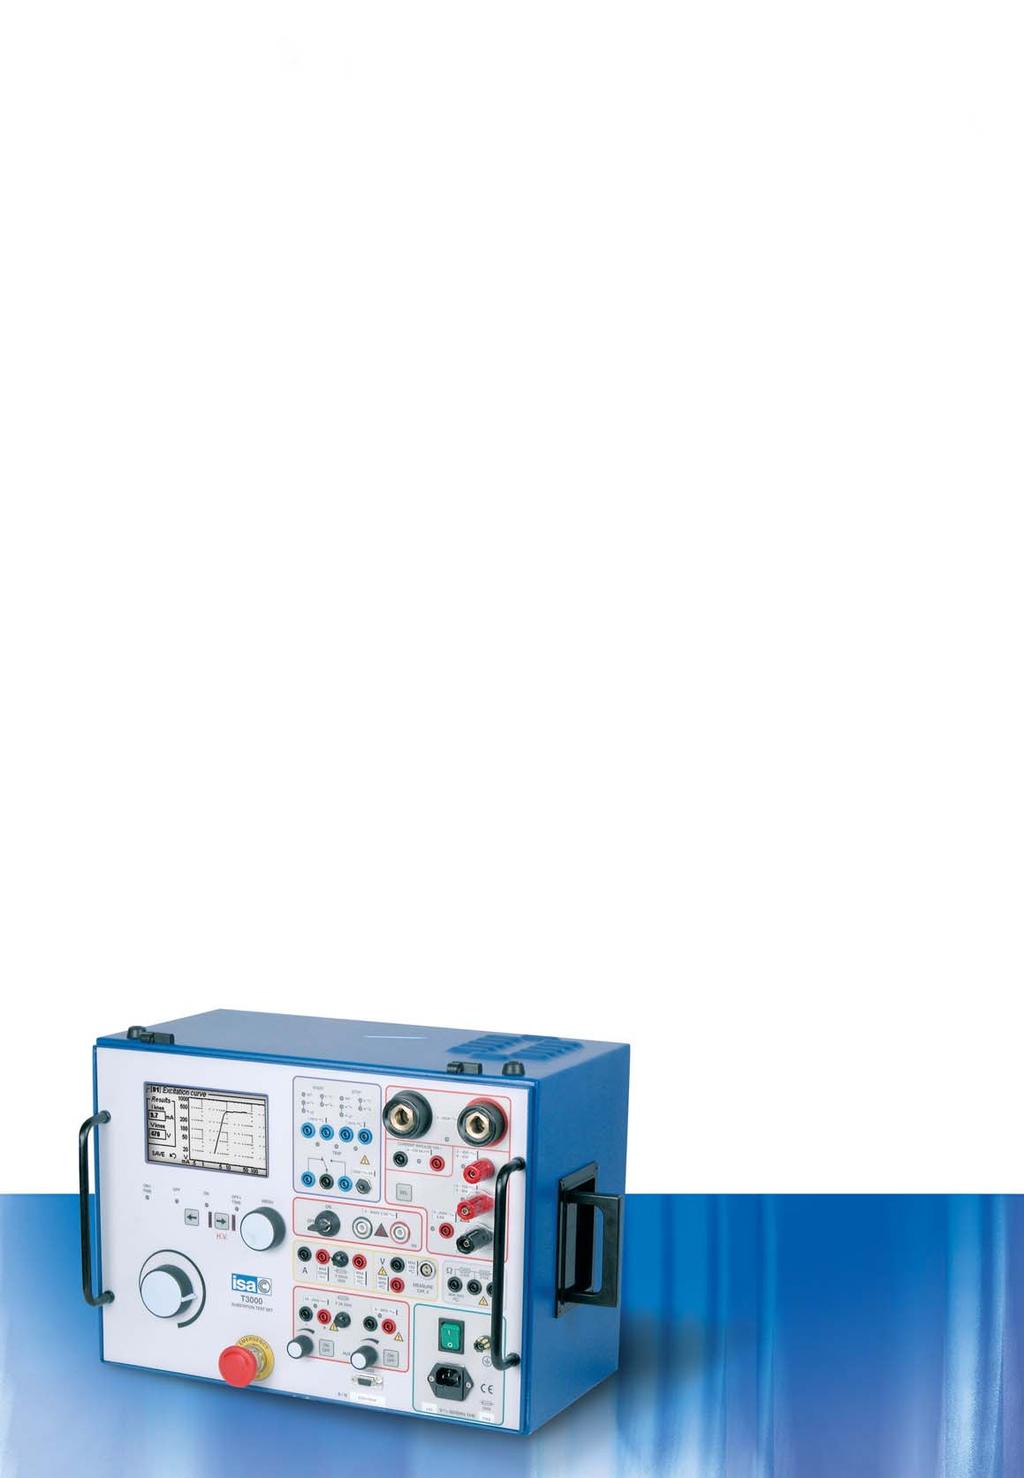 T/3000 Substation Maintenance and Commissioning Test Equipment MULTI FUNCTION SYSTEM FOR TESTING SUBSTATION EQUIPMENT SUCH AS: CURRENT, VOLTAGE AND POWER TRANSFORMERS, ALL TYPE OF PROTECTION RELAYS,